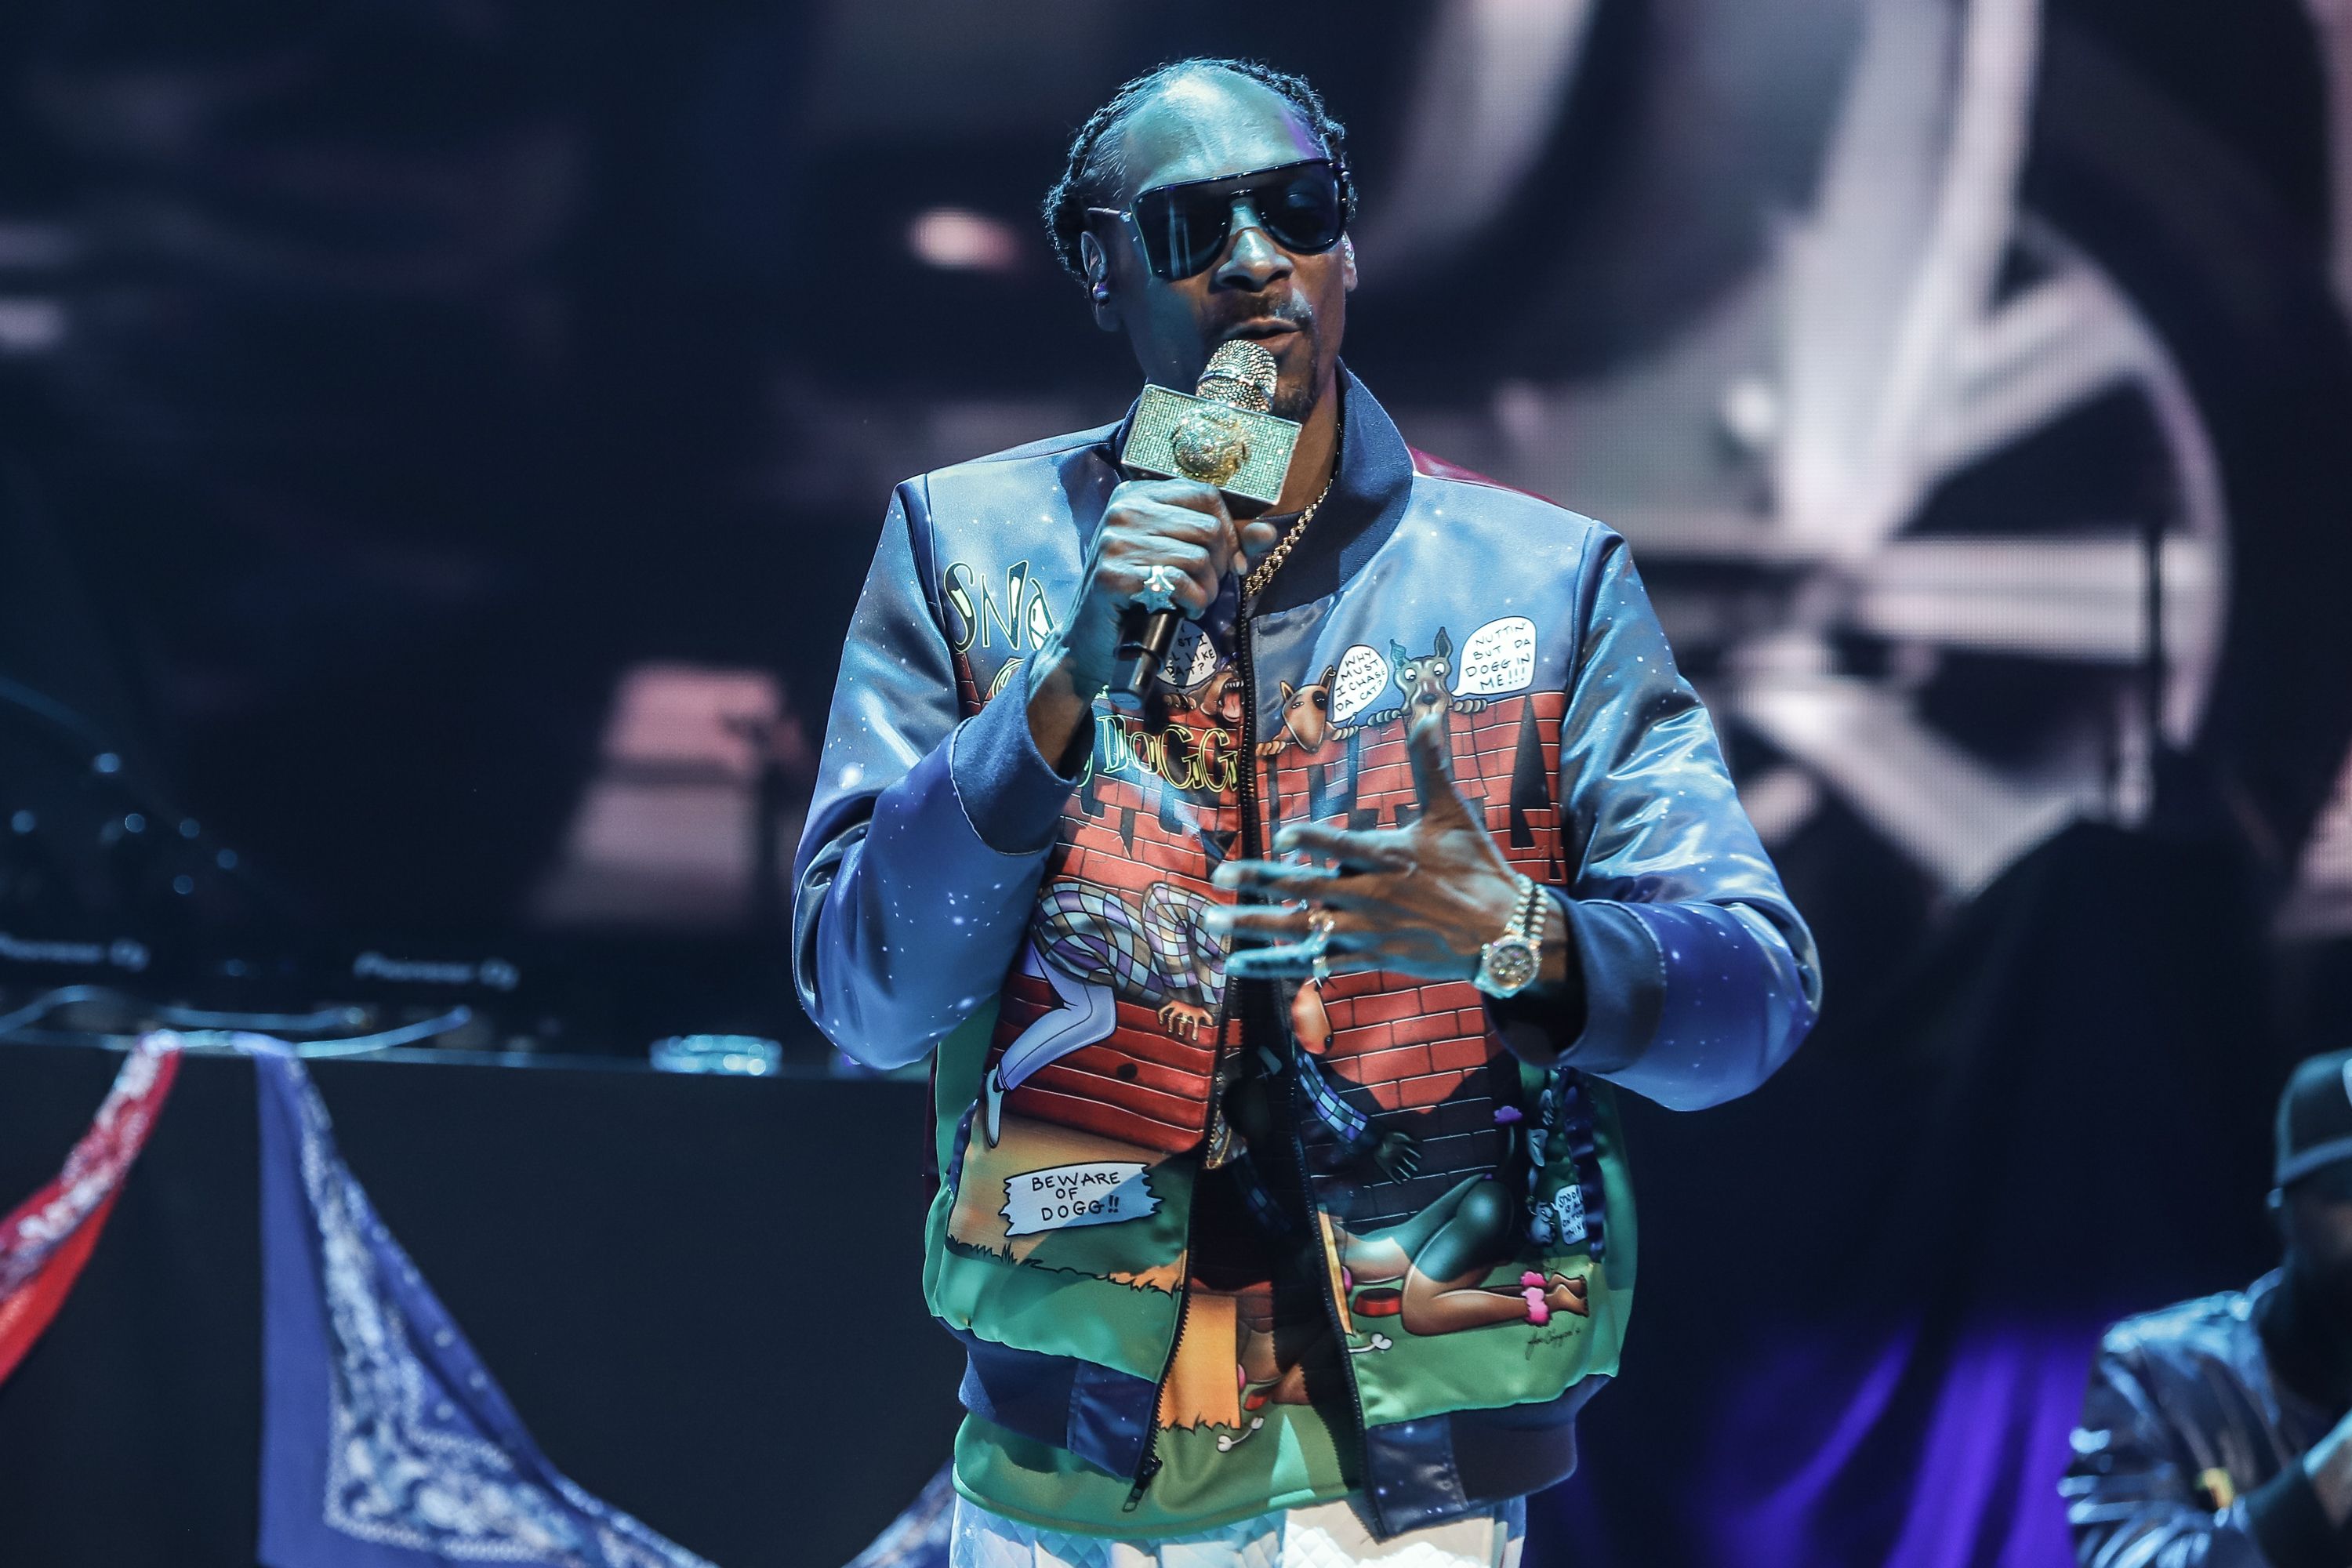 Snoop Dogg performs at the Bud Light Super Bowl Music Fest on January 31, 2020 | Photo: Getty Images